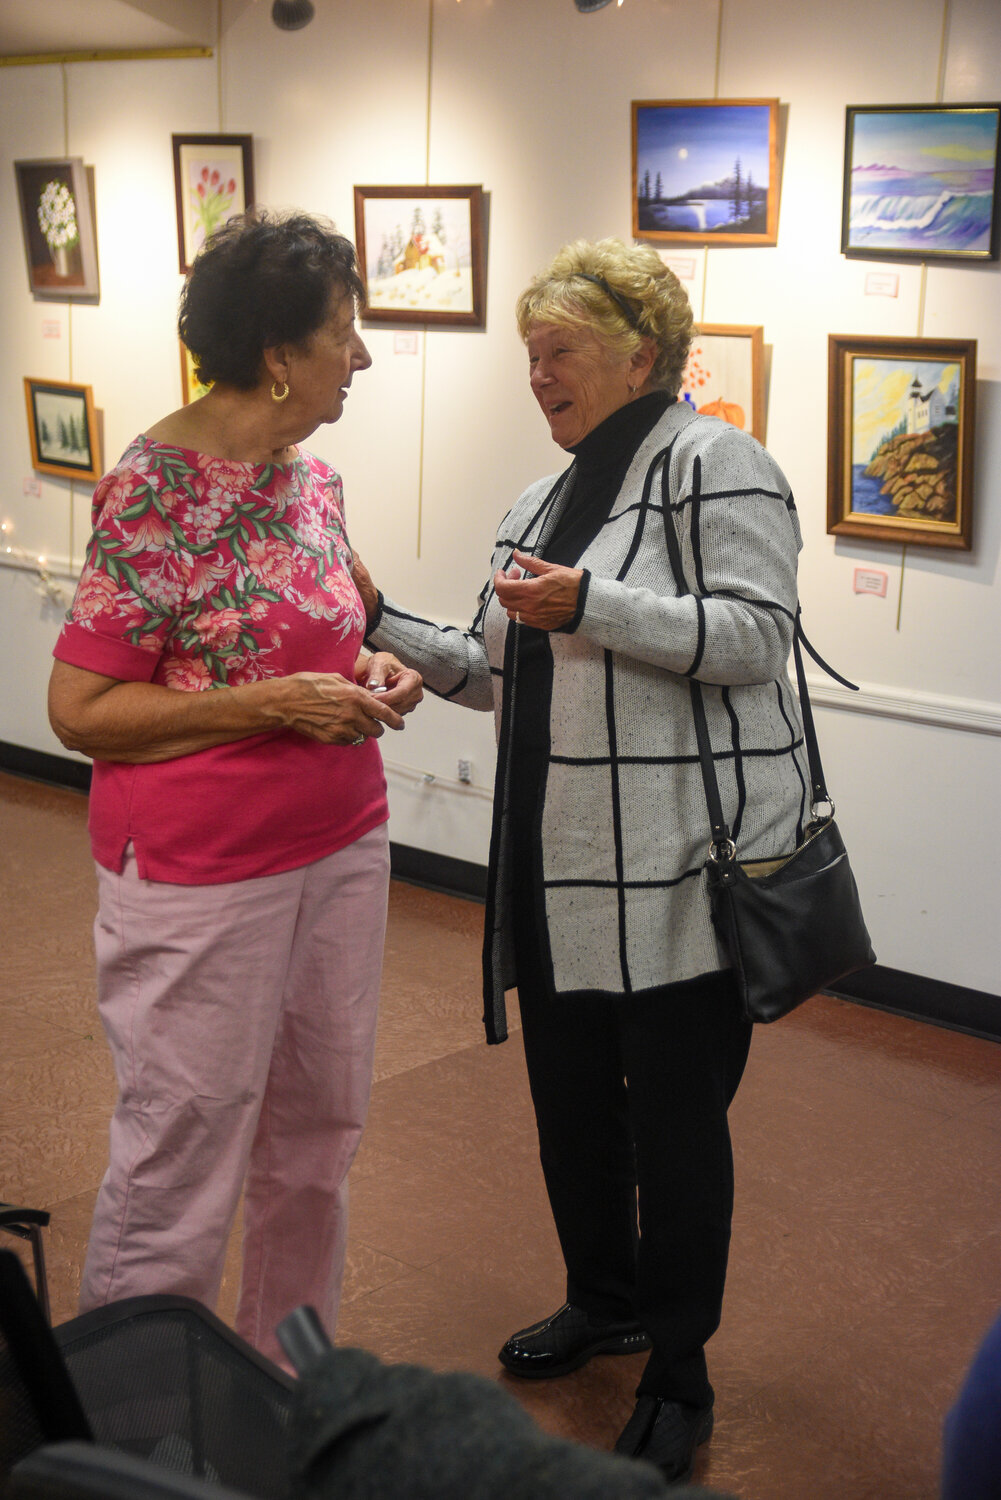 Zanetto and Pat Southard chat at the reception of her show. The display opened earlier this month.